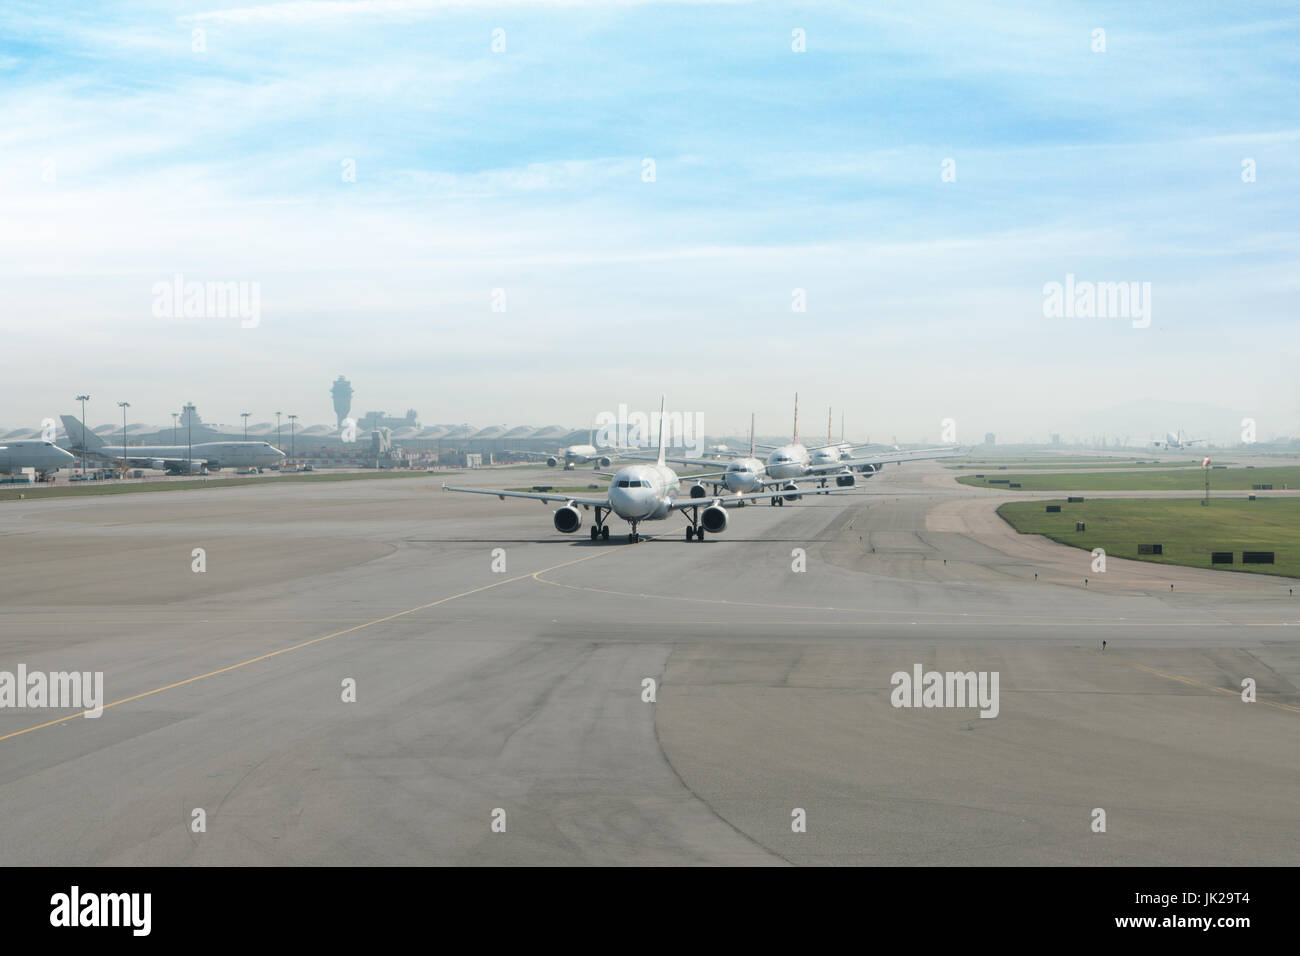 Many airplane prepare takes off from the runway in airport. Stock Photo